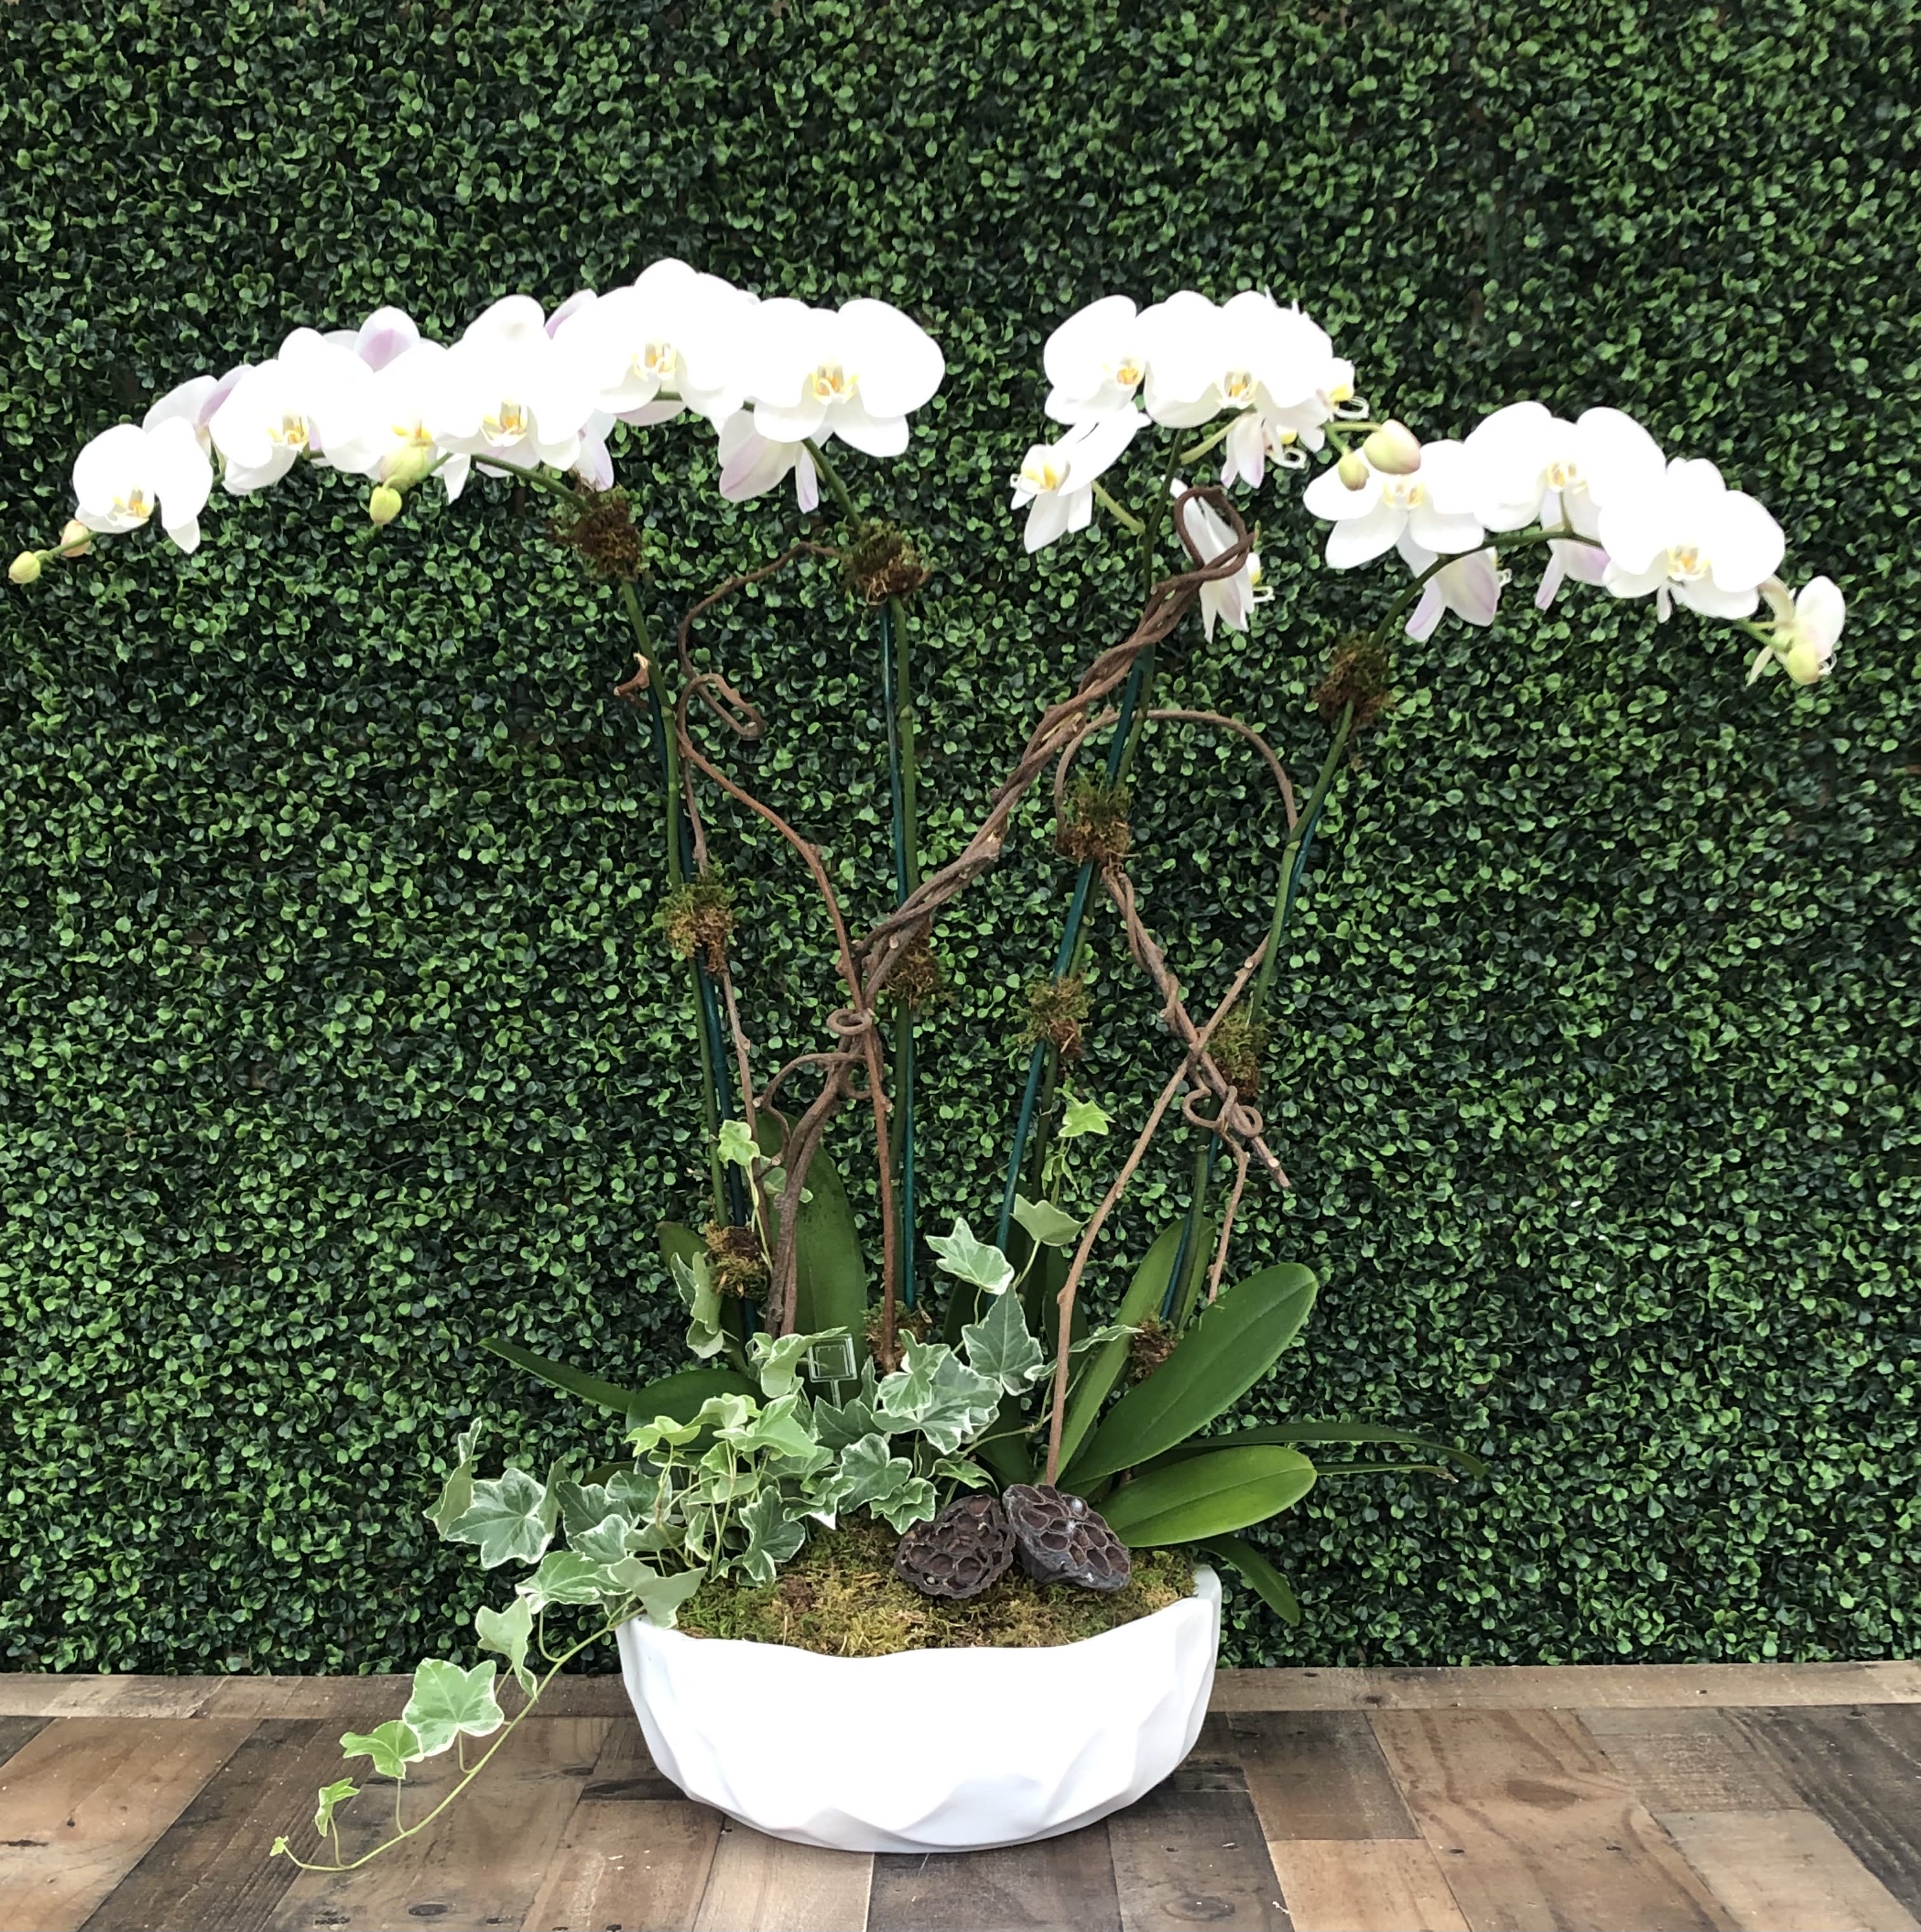 Orchids oasis  - Enjoy these beautiful white orchids with a touch of greens in this stunning white ceramic pot.  Orchids can be substituted for one of our breathtaking vibrant colors, as well.